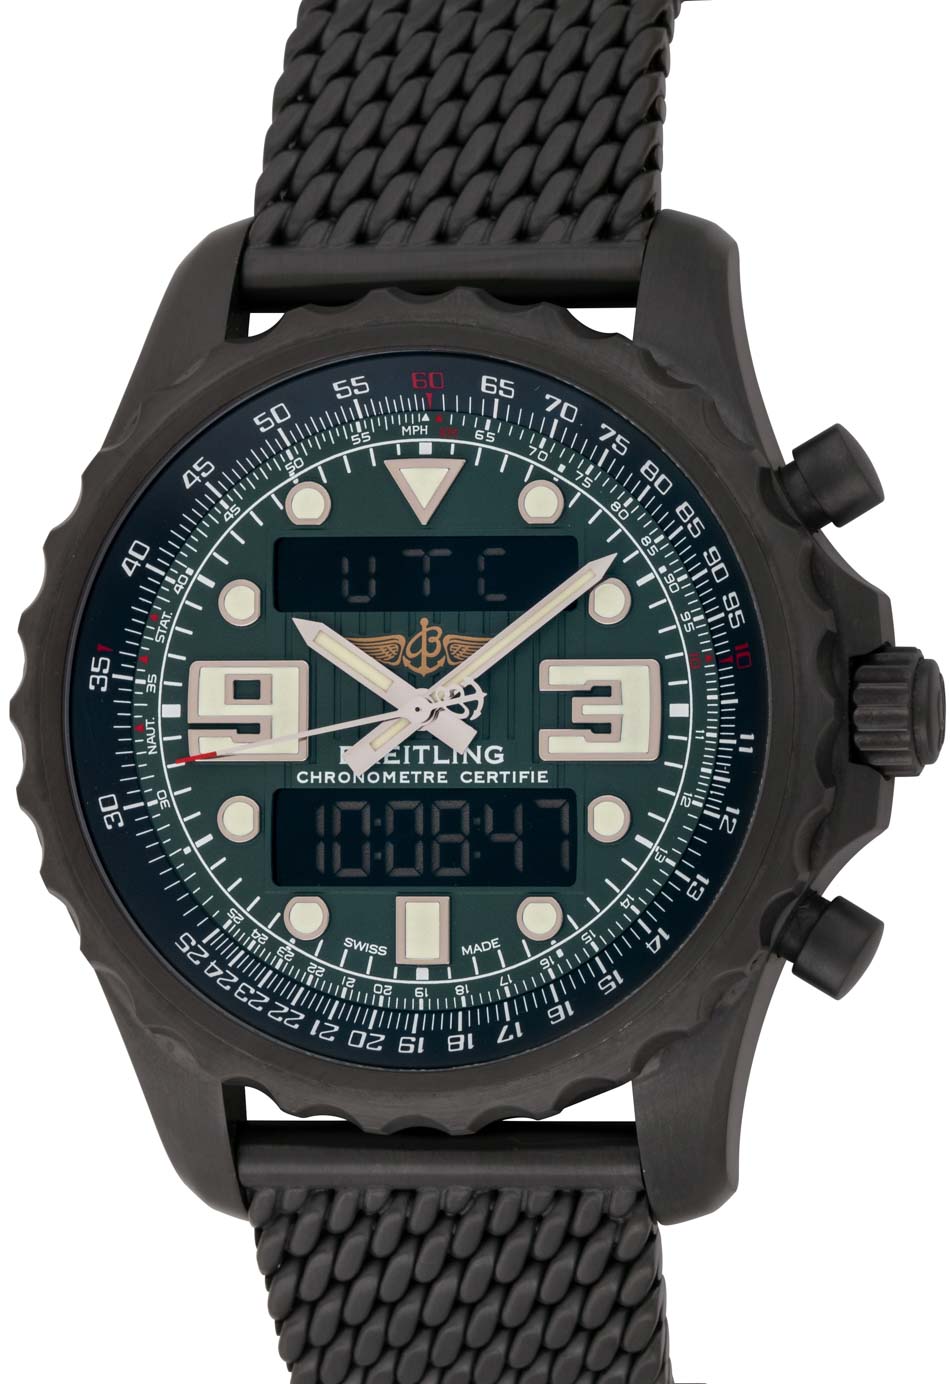 Breitling - Chronospace Blacksteel Limited : M7836522/L521 : SOLD OUT ...